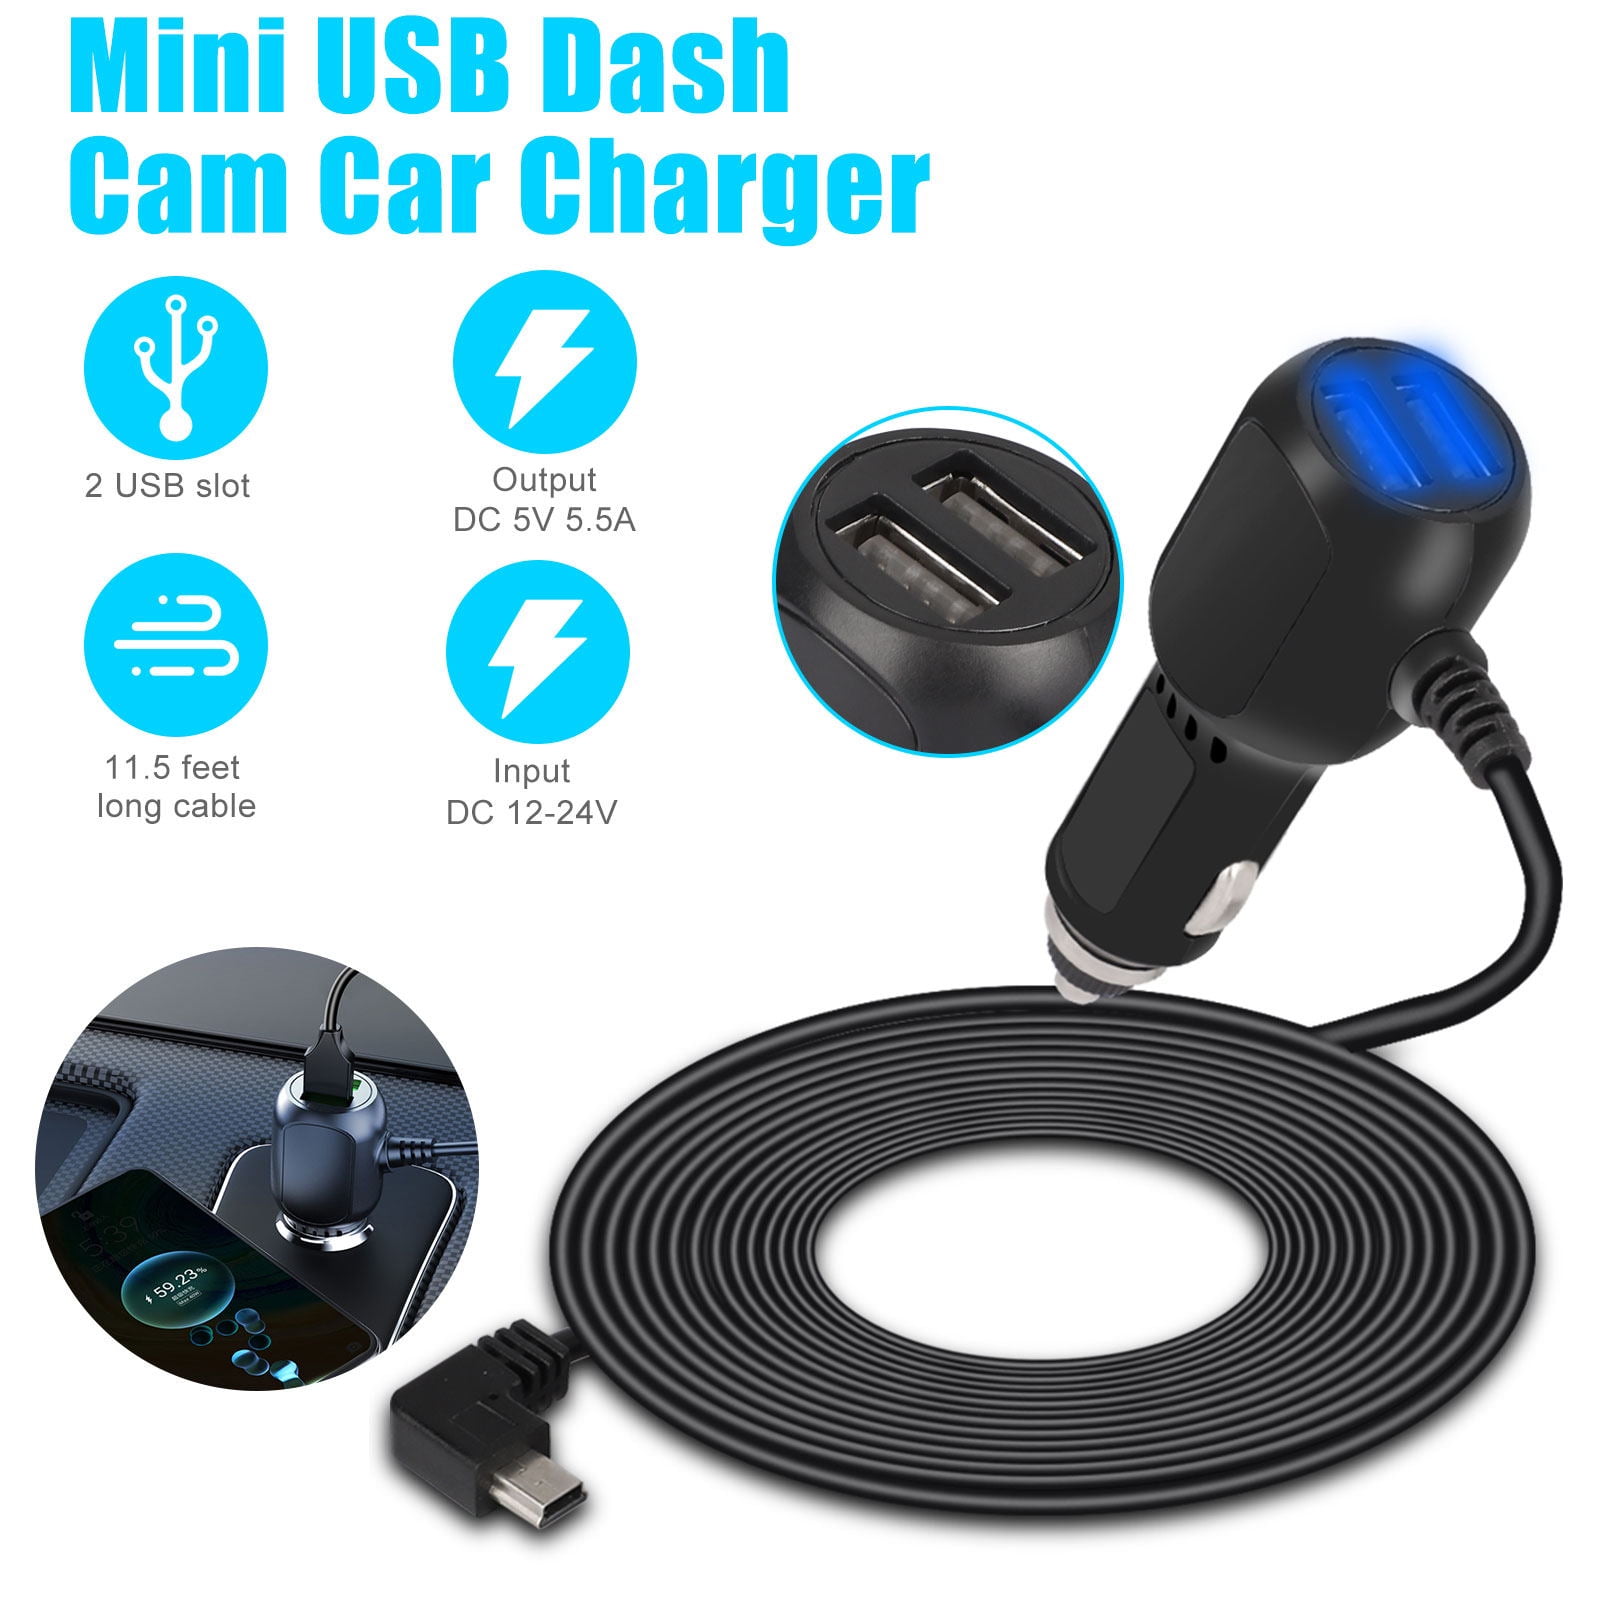 Mini USB Cam Car Charger, EEEkit Dual USB Charger Socket with LED, Waterproof 12V-24V USB Charger, QC 3.0 Fast Charge Power Outlet Adapter Fit for Car, Boat, Marine, GPS - Walmart.com